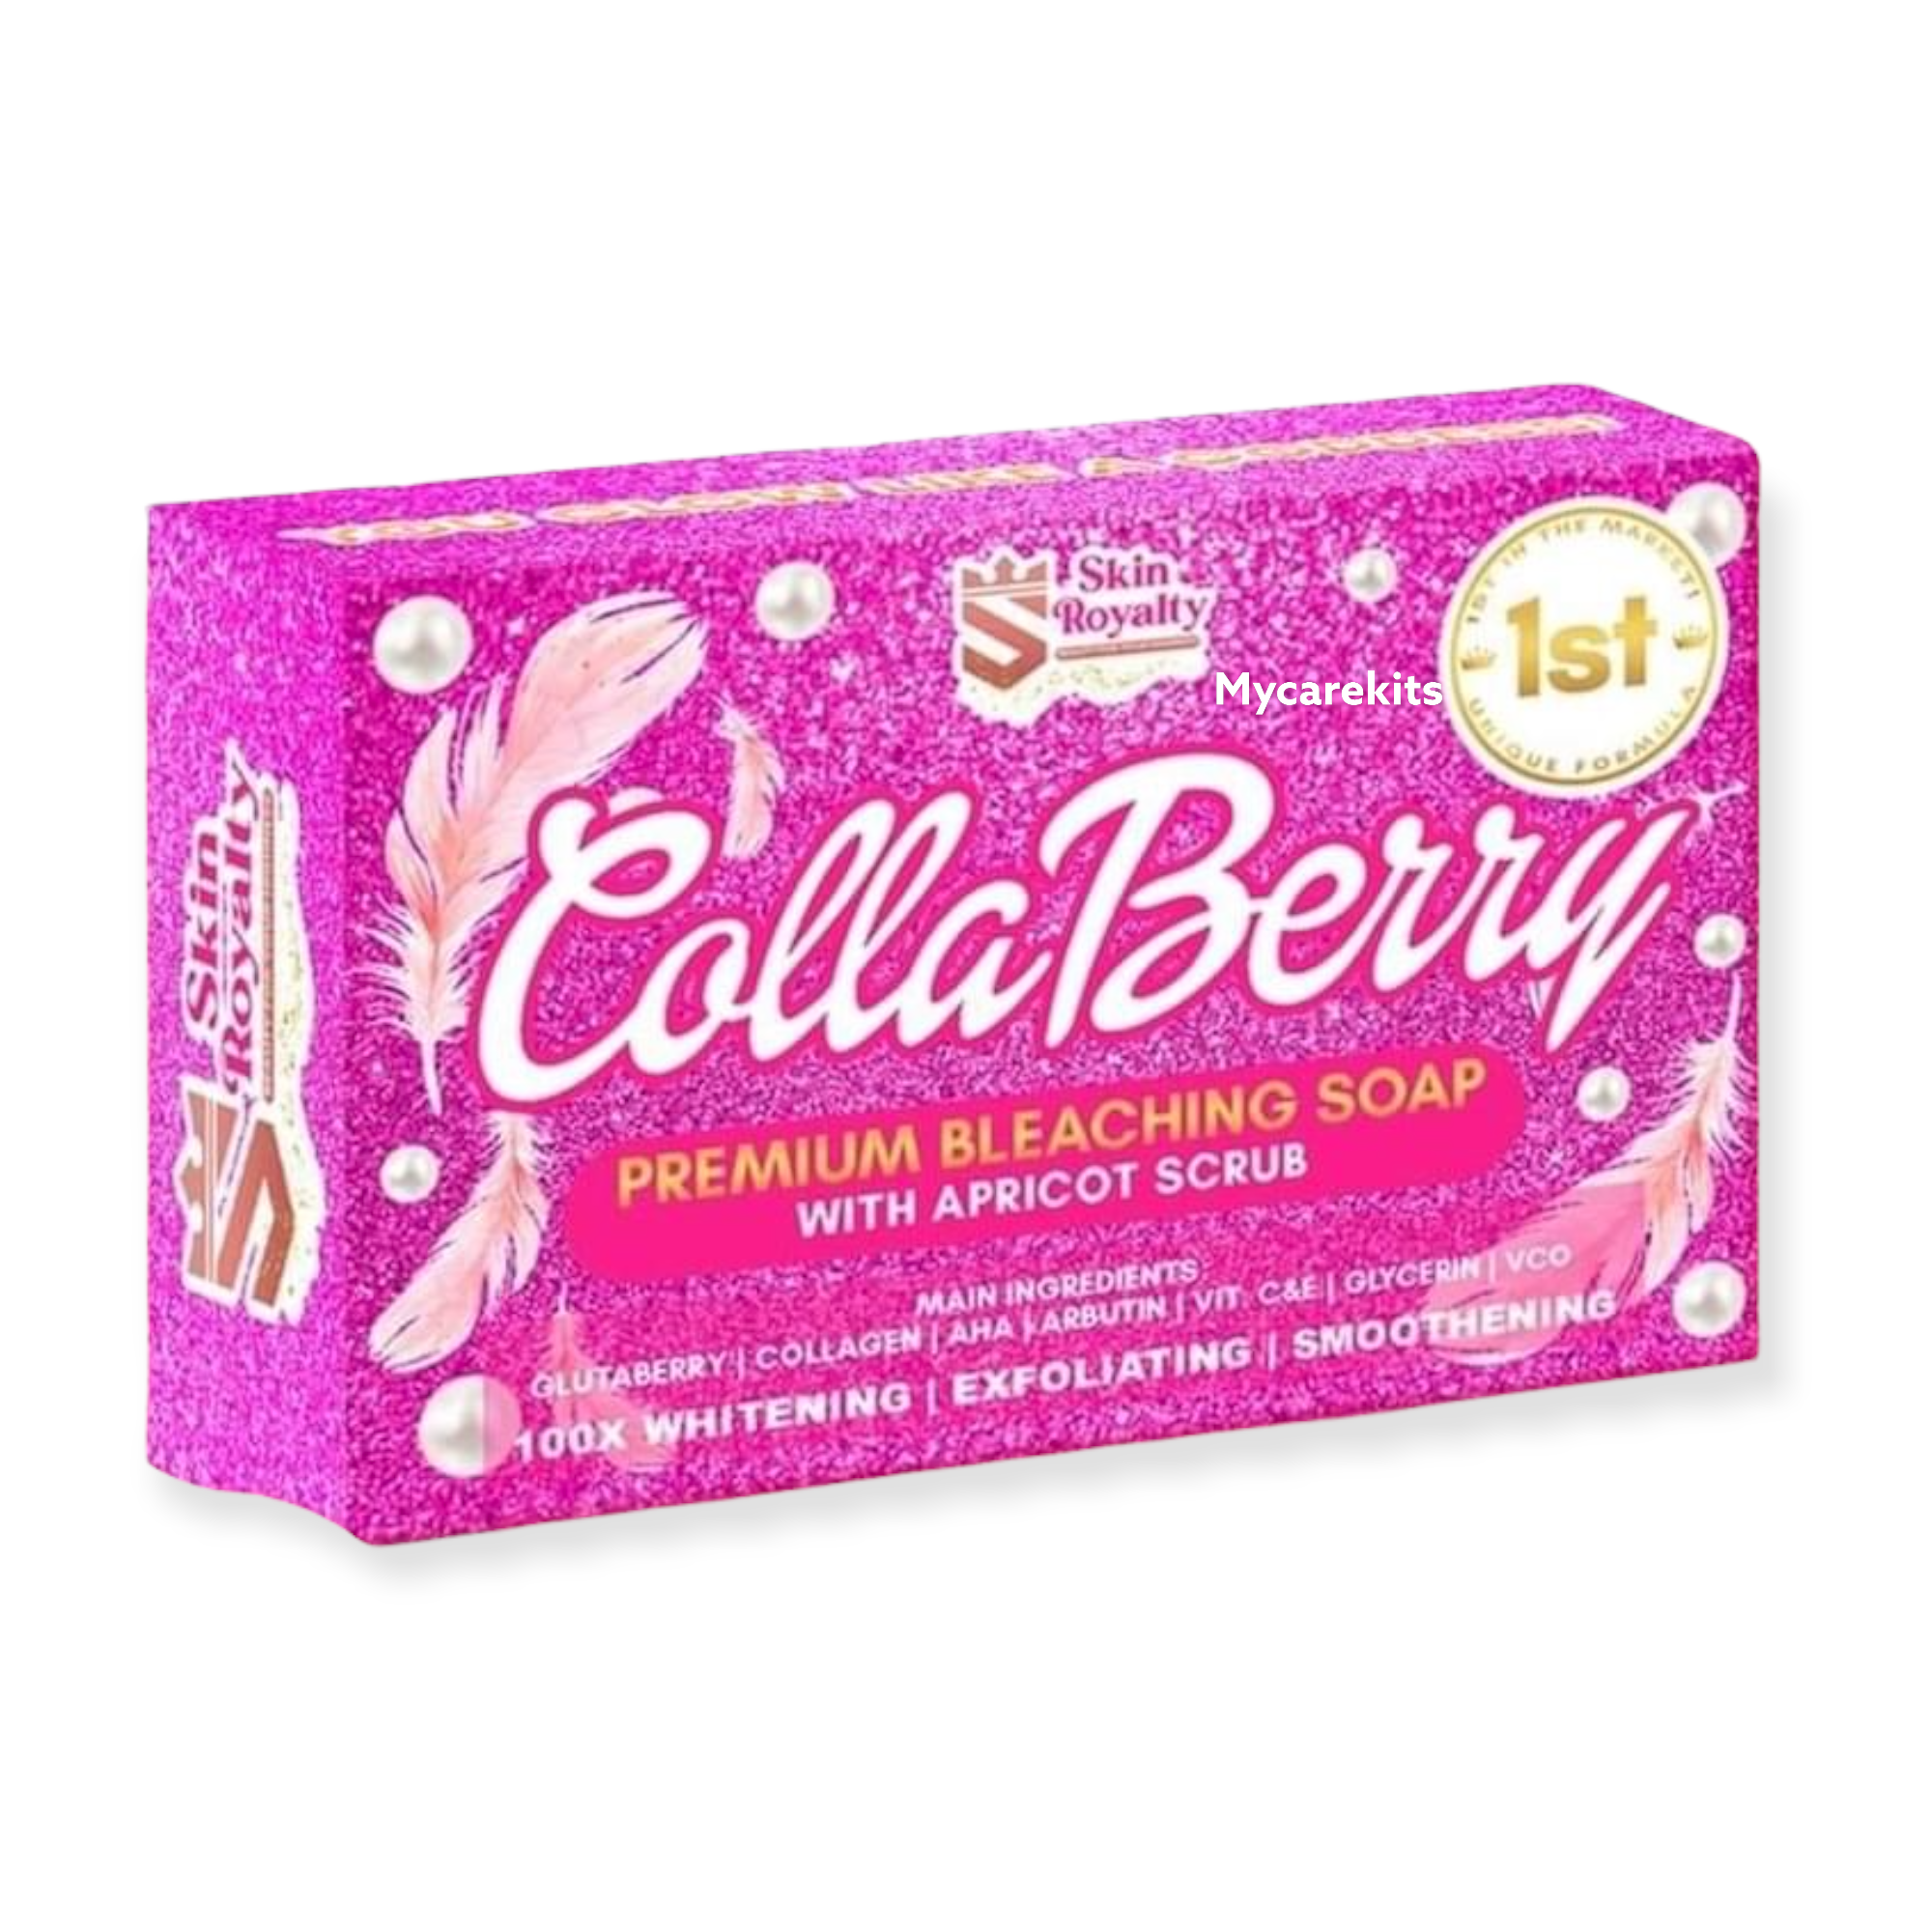 CollaBerry Premium Bleaching Soap with Apricot Scrub